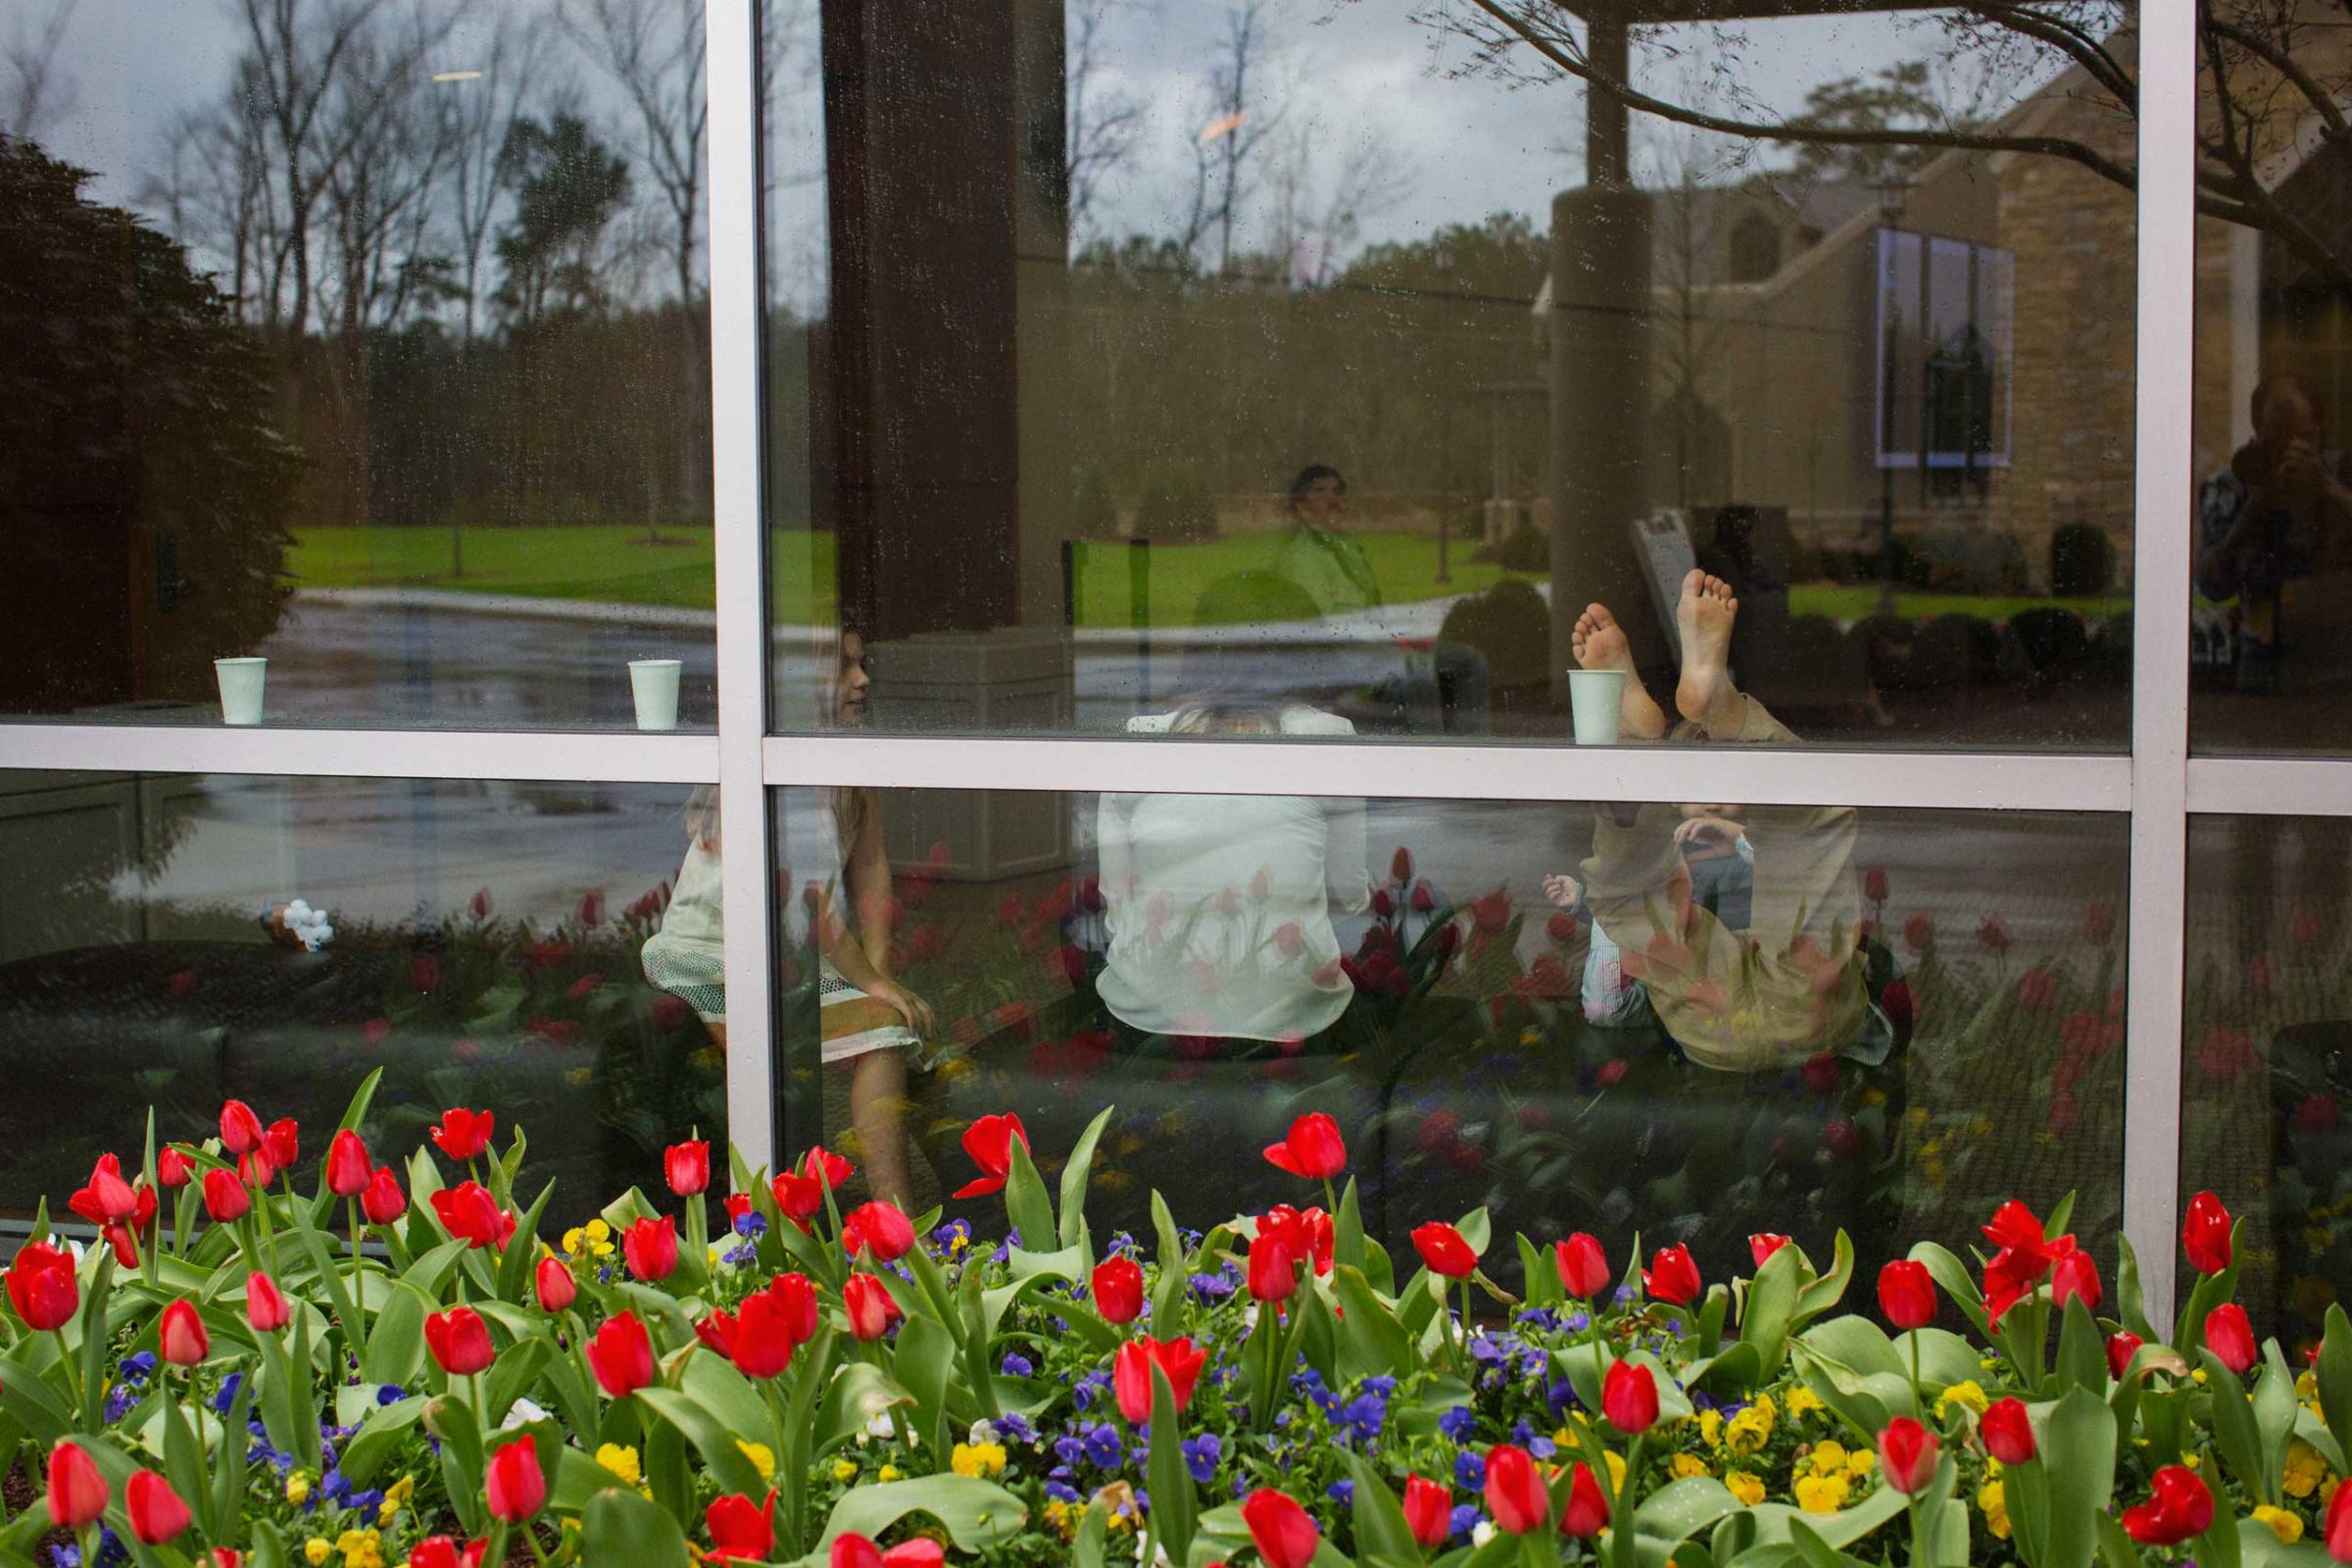 A family waits outside of the auditorium at Church of the Highlands in Birmingham, Ala. on March 22, 2015.